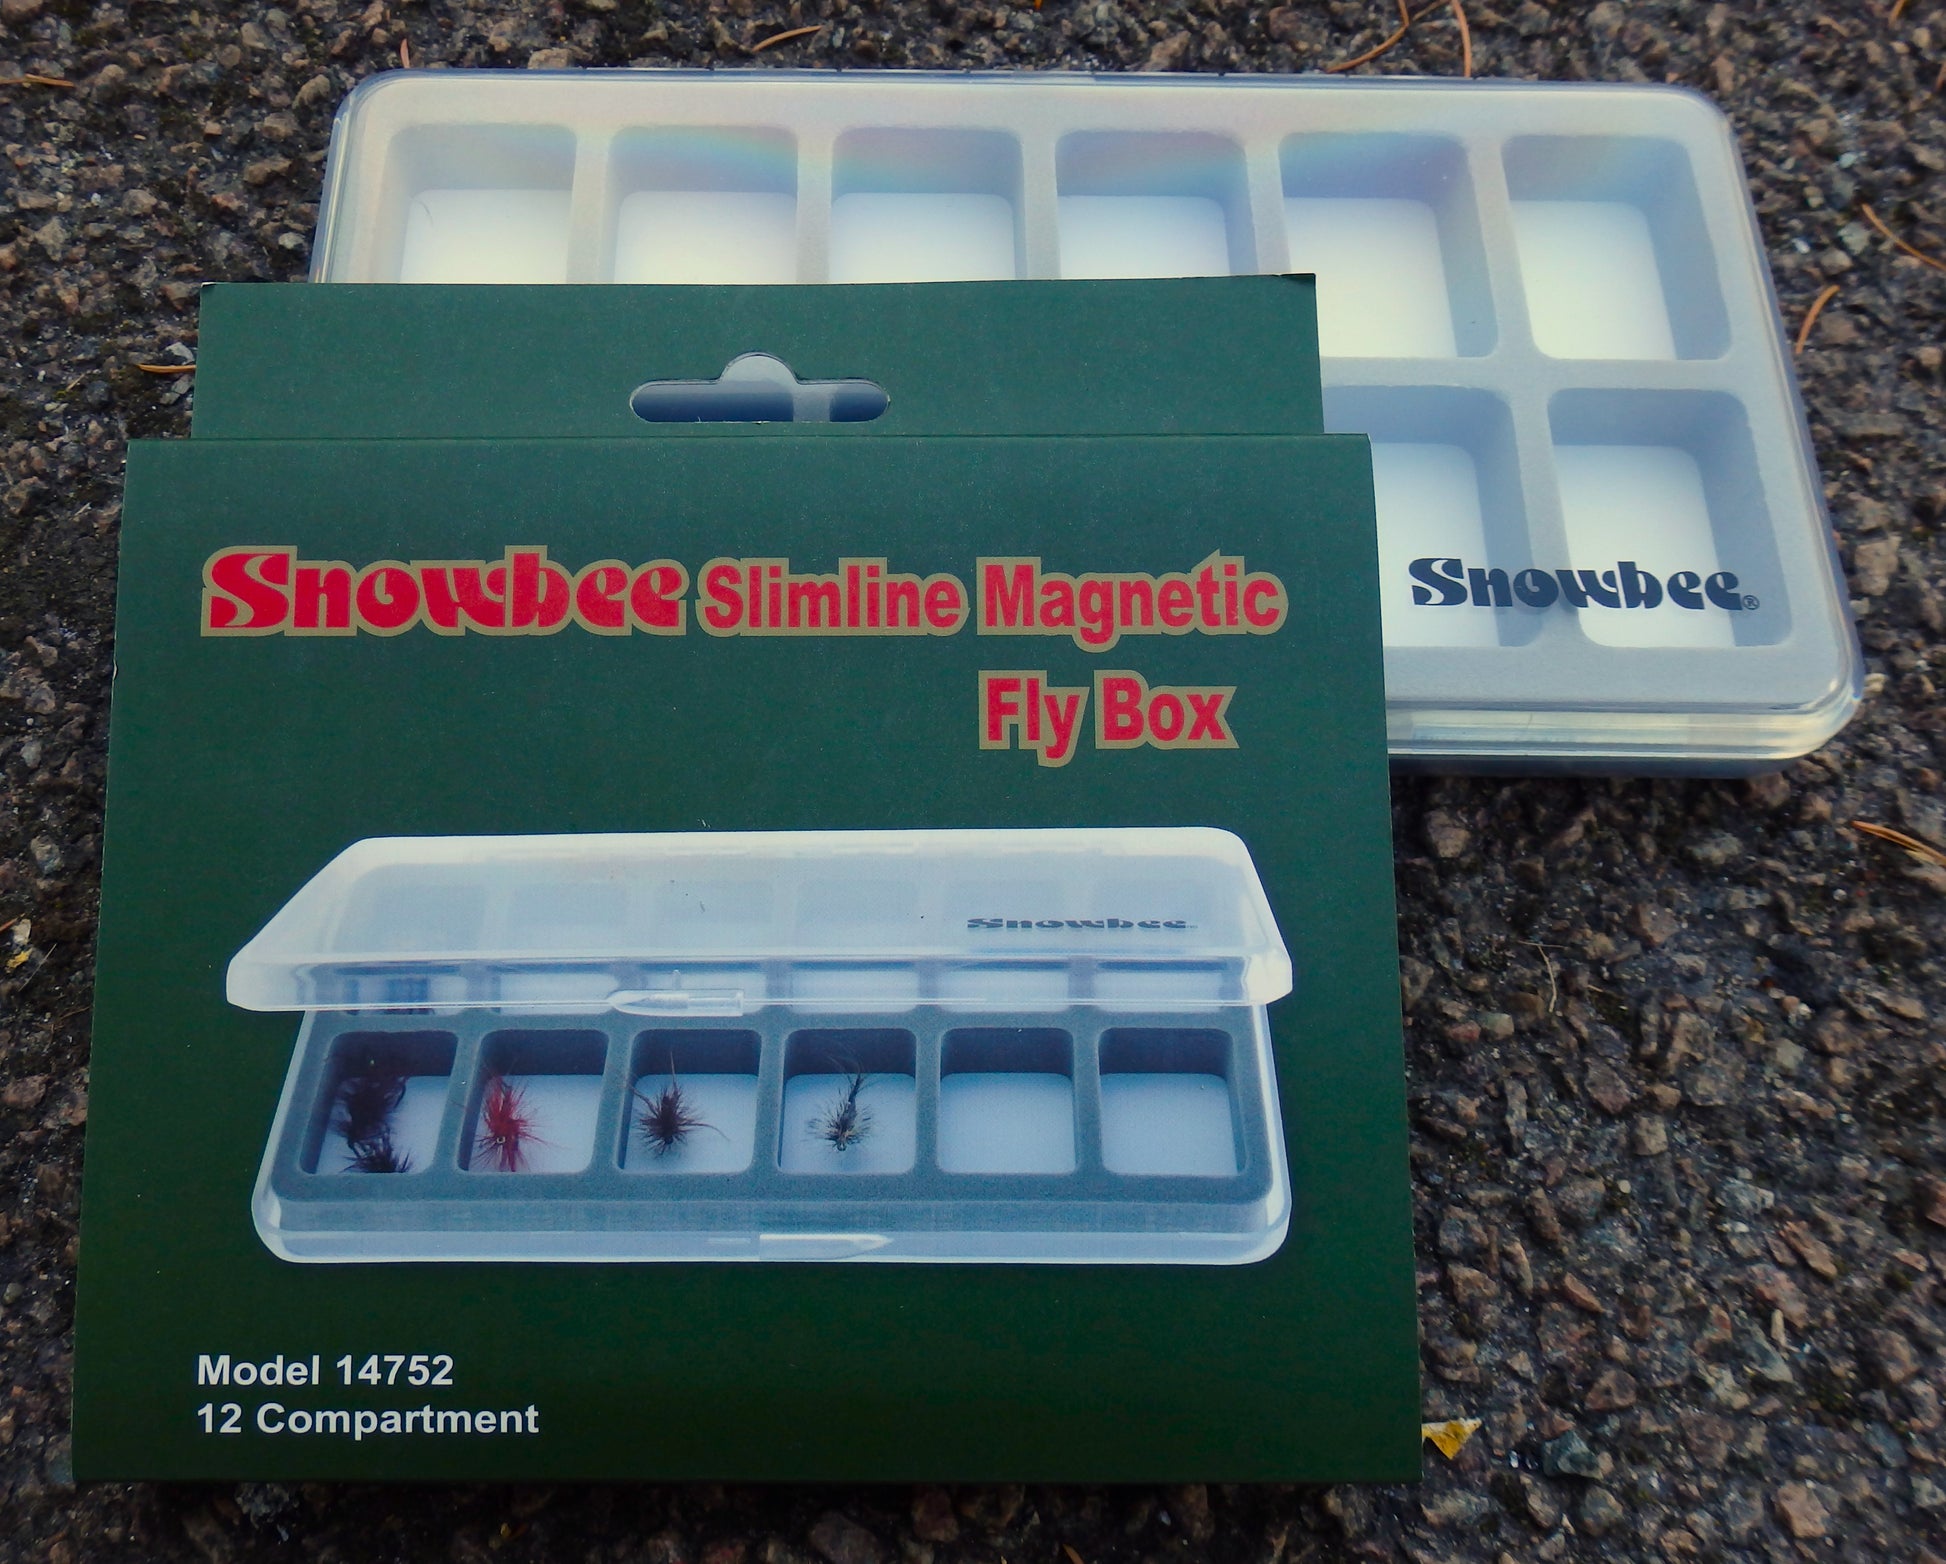 Snowbee Slimline Magnetic Fly Box 12 Compartment – KD Radcliffe Ltd